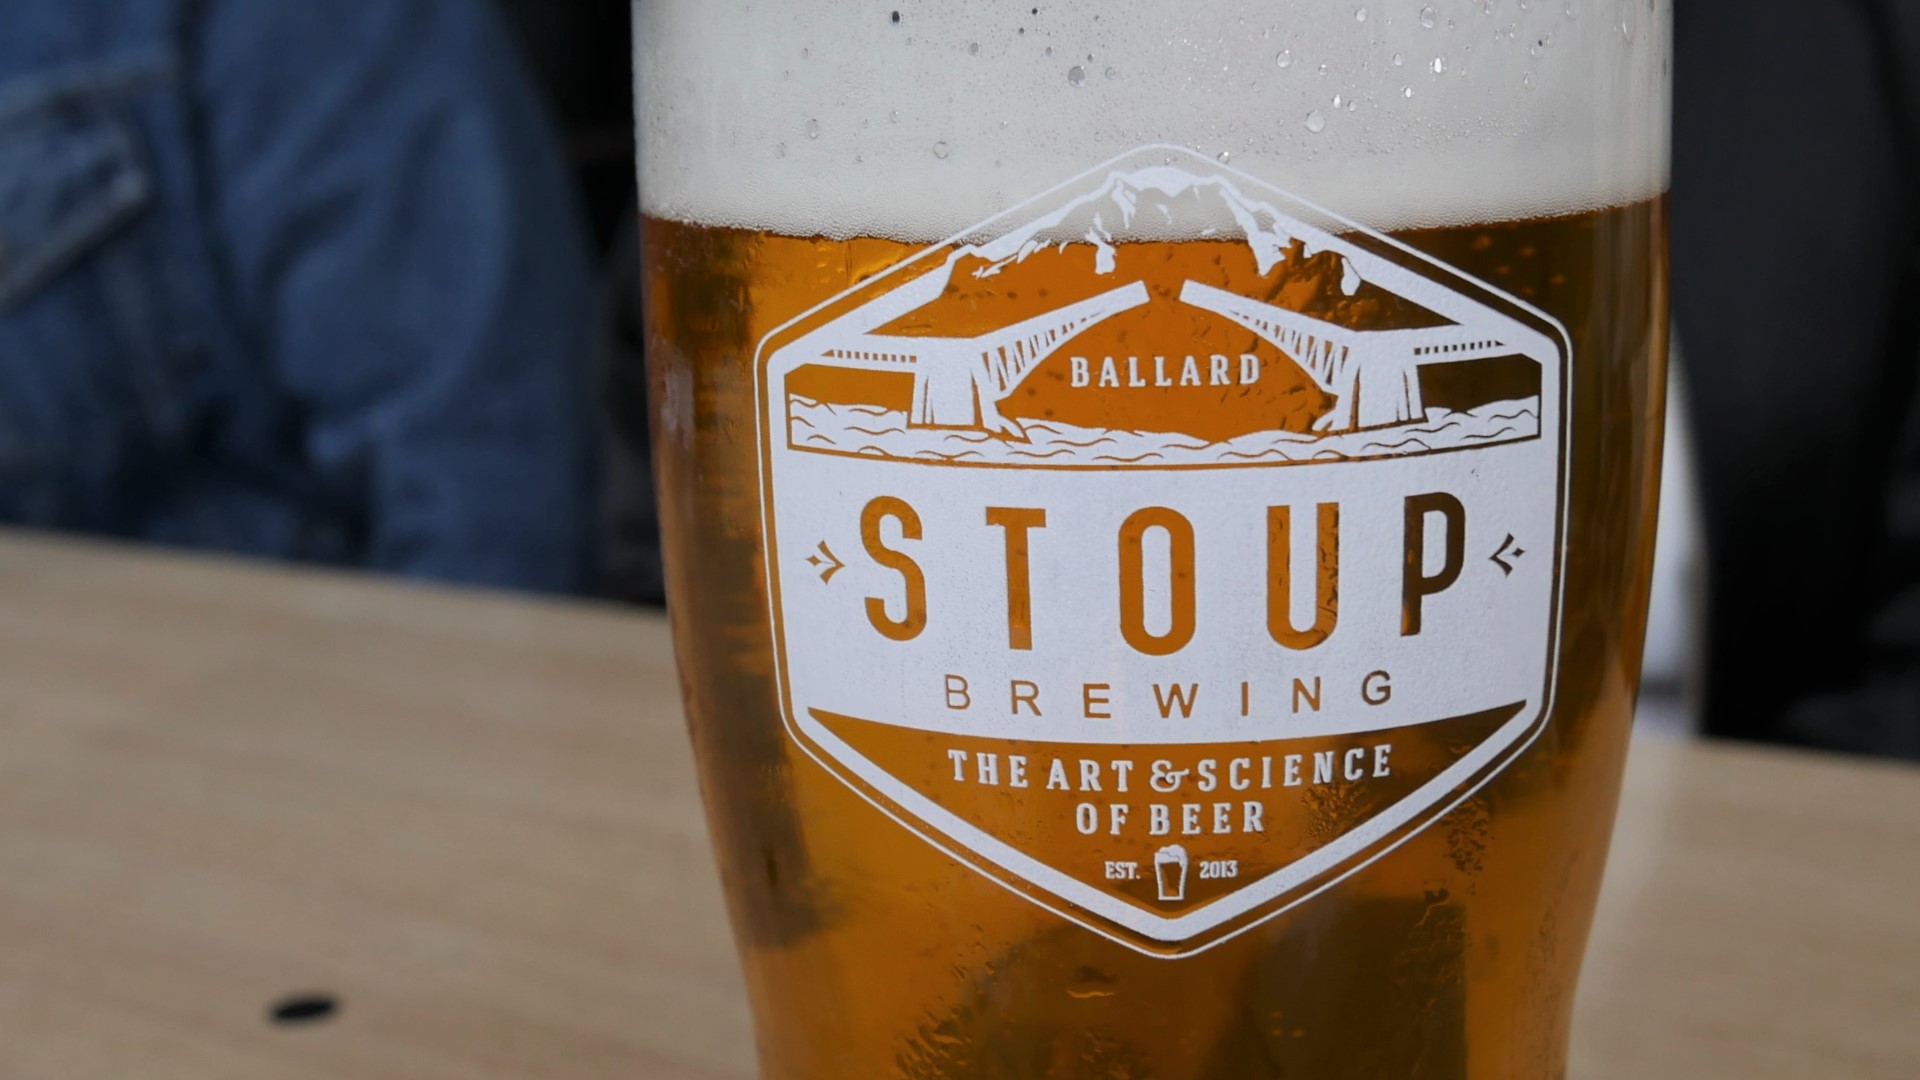 Stoup Brewing in Kenmore serves up a full menu along with their beer, including pizza and soft serve. #k5evening